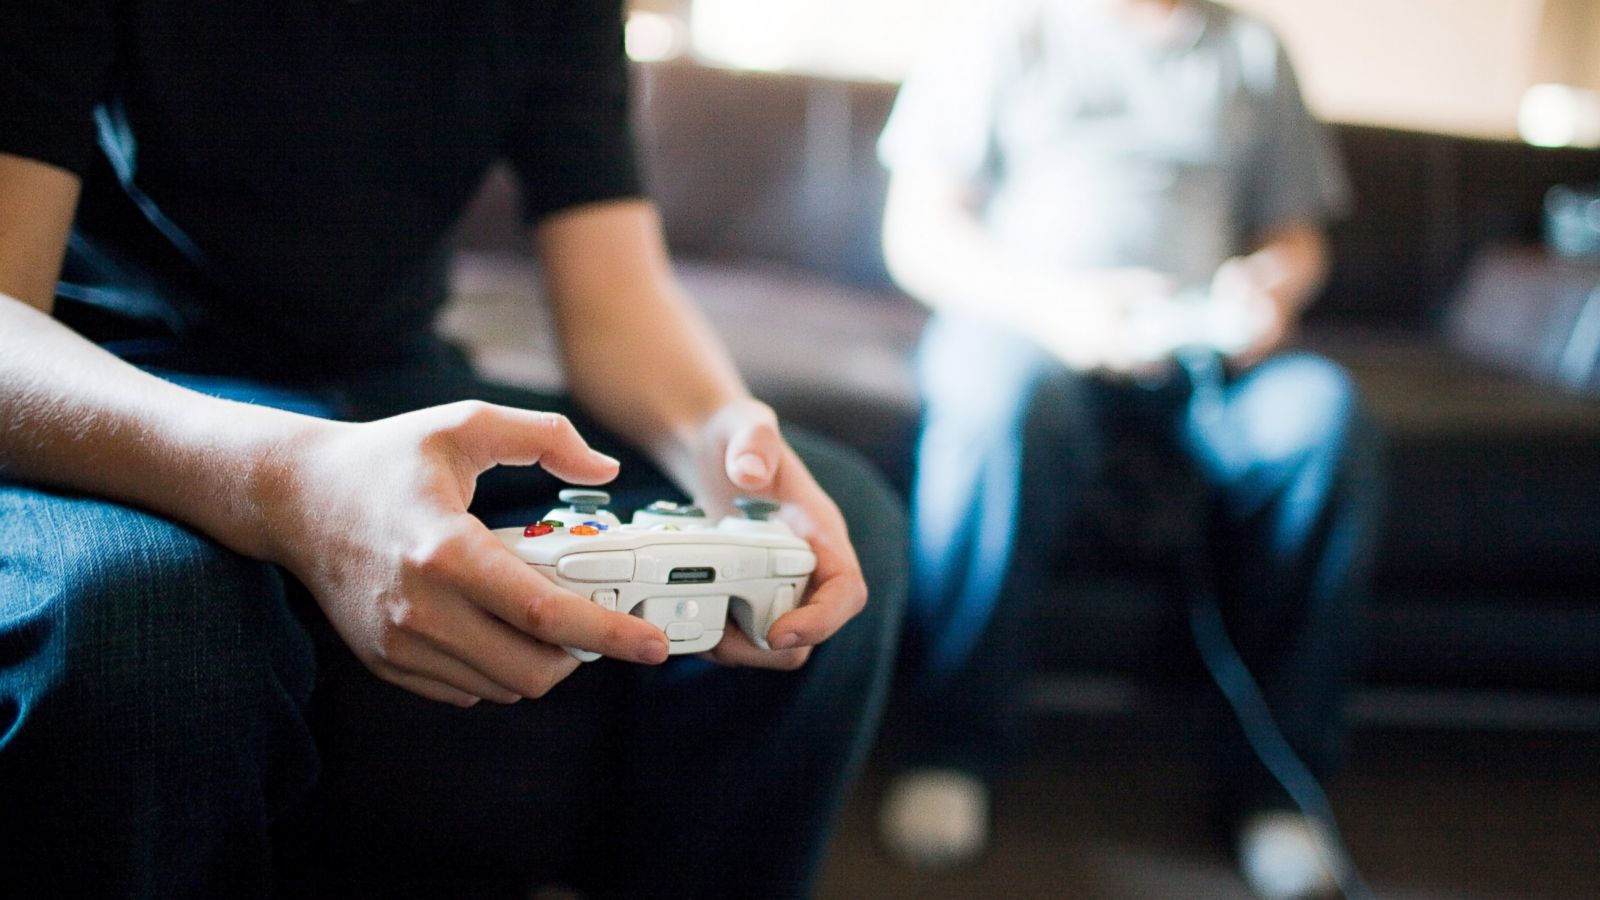 Teens who play online games perform better in school, study says